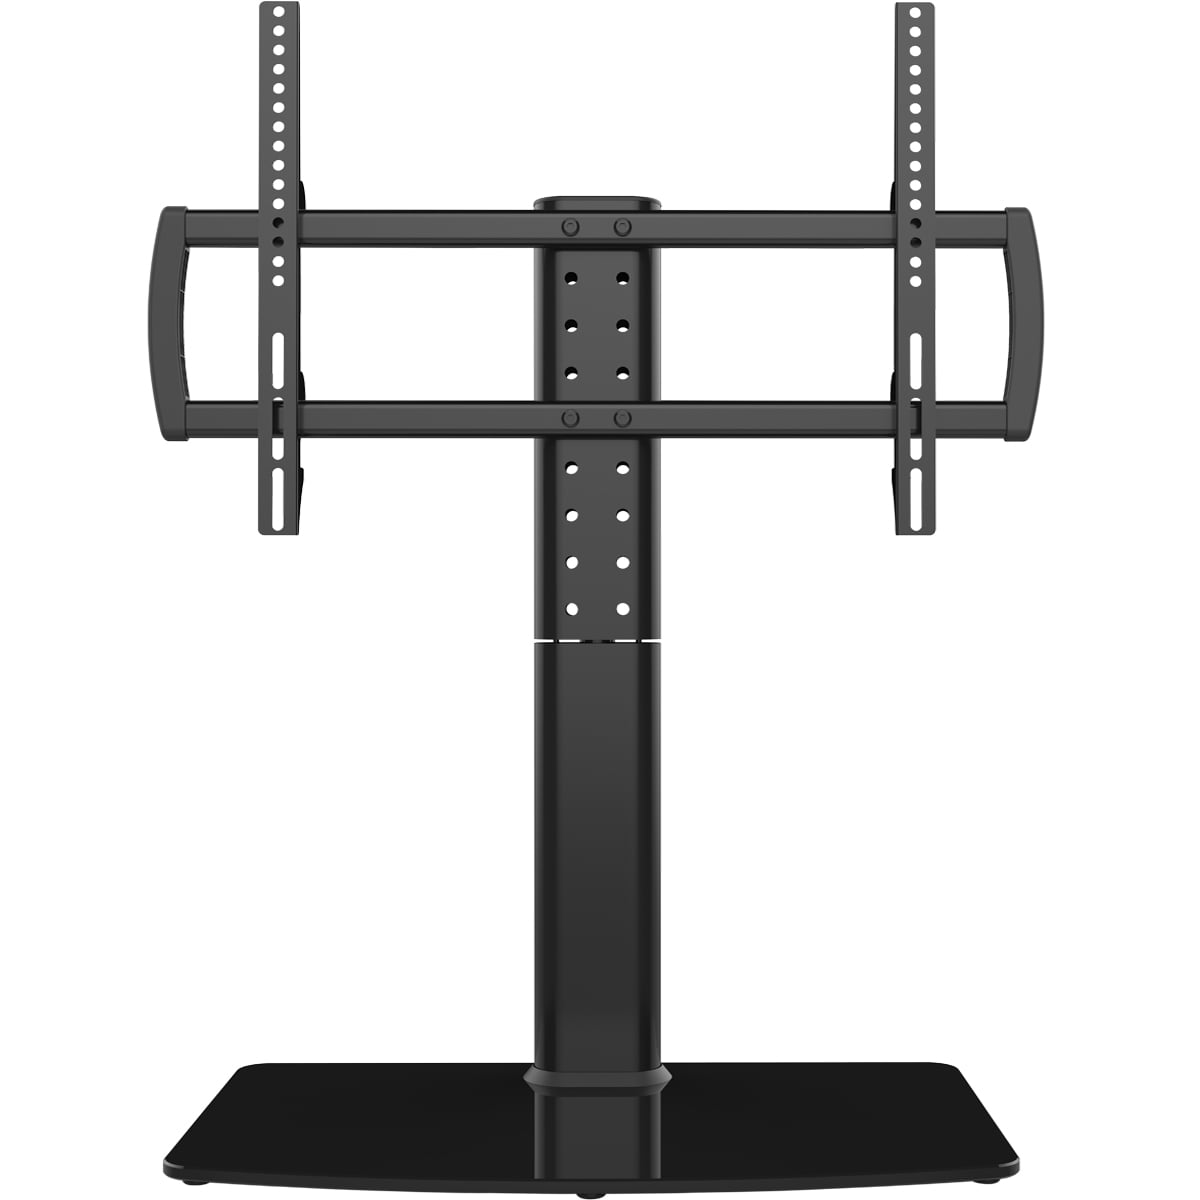 Weighing up to 88lbs VESA 400x400mm 5Rcom UT1002A Universal Tabletop TV Stand Base with Swivel Mount and Height Adjustable for 27 32 37 40 42 46 50 inch TVs